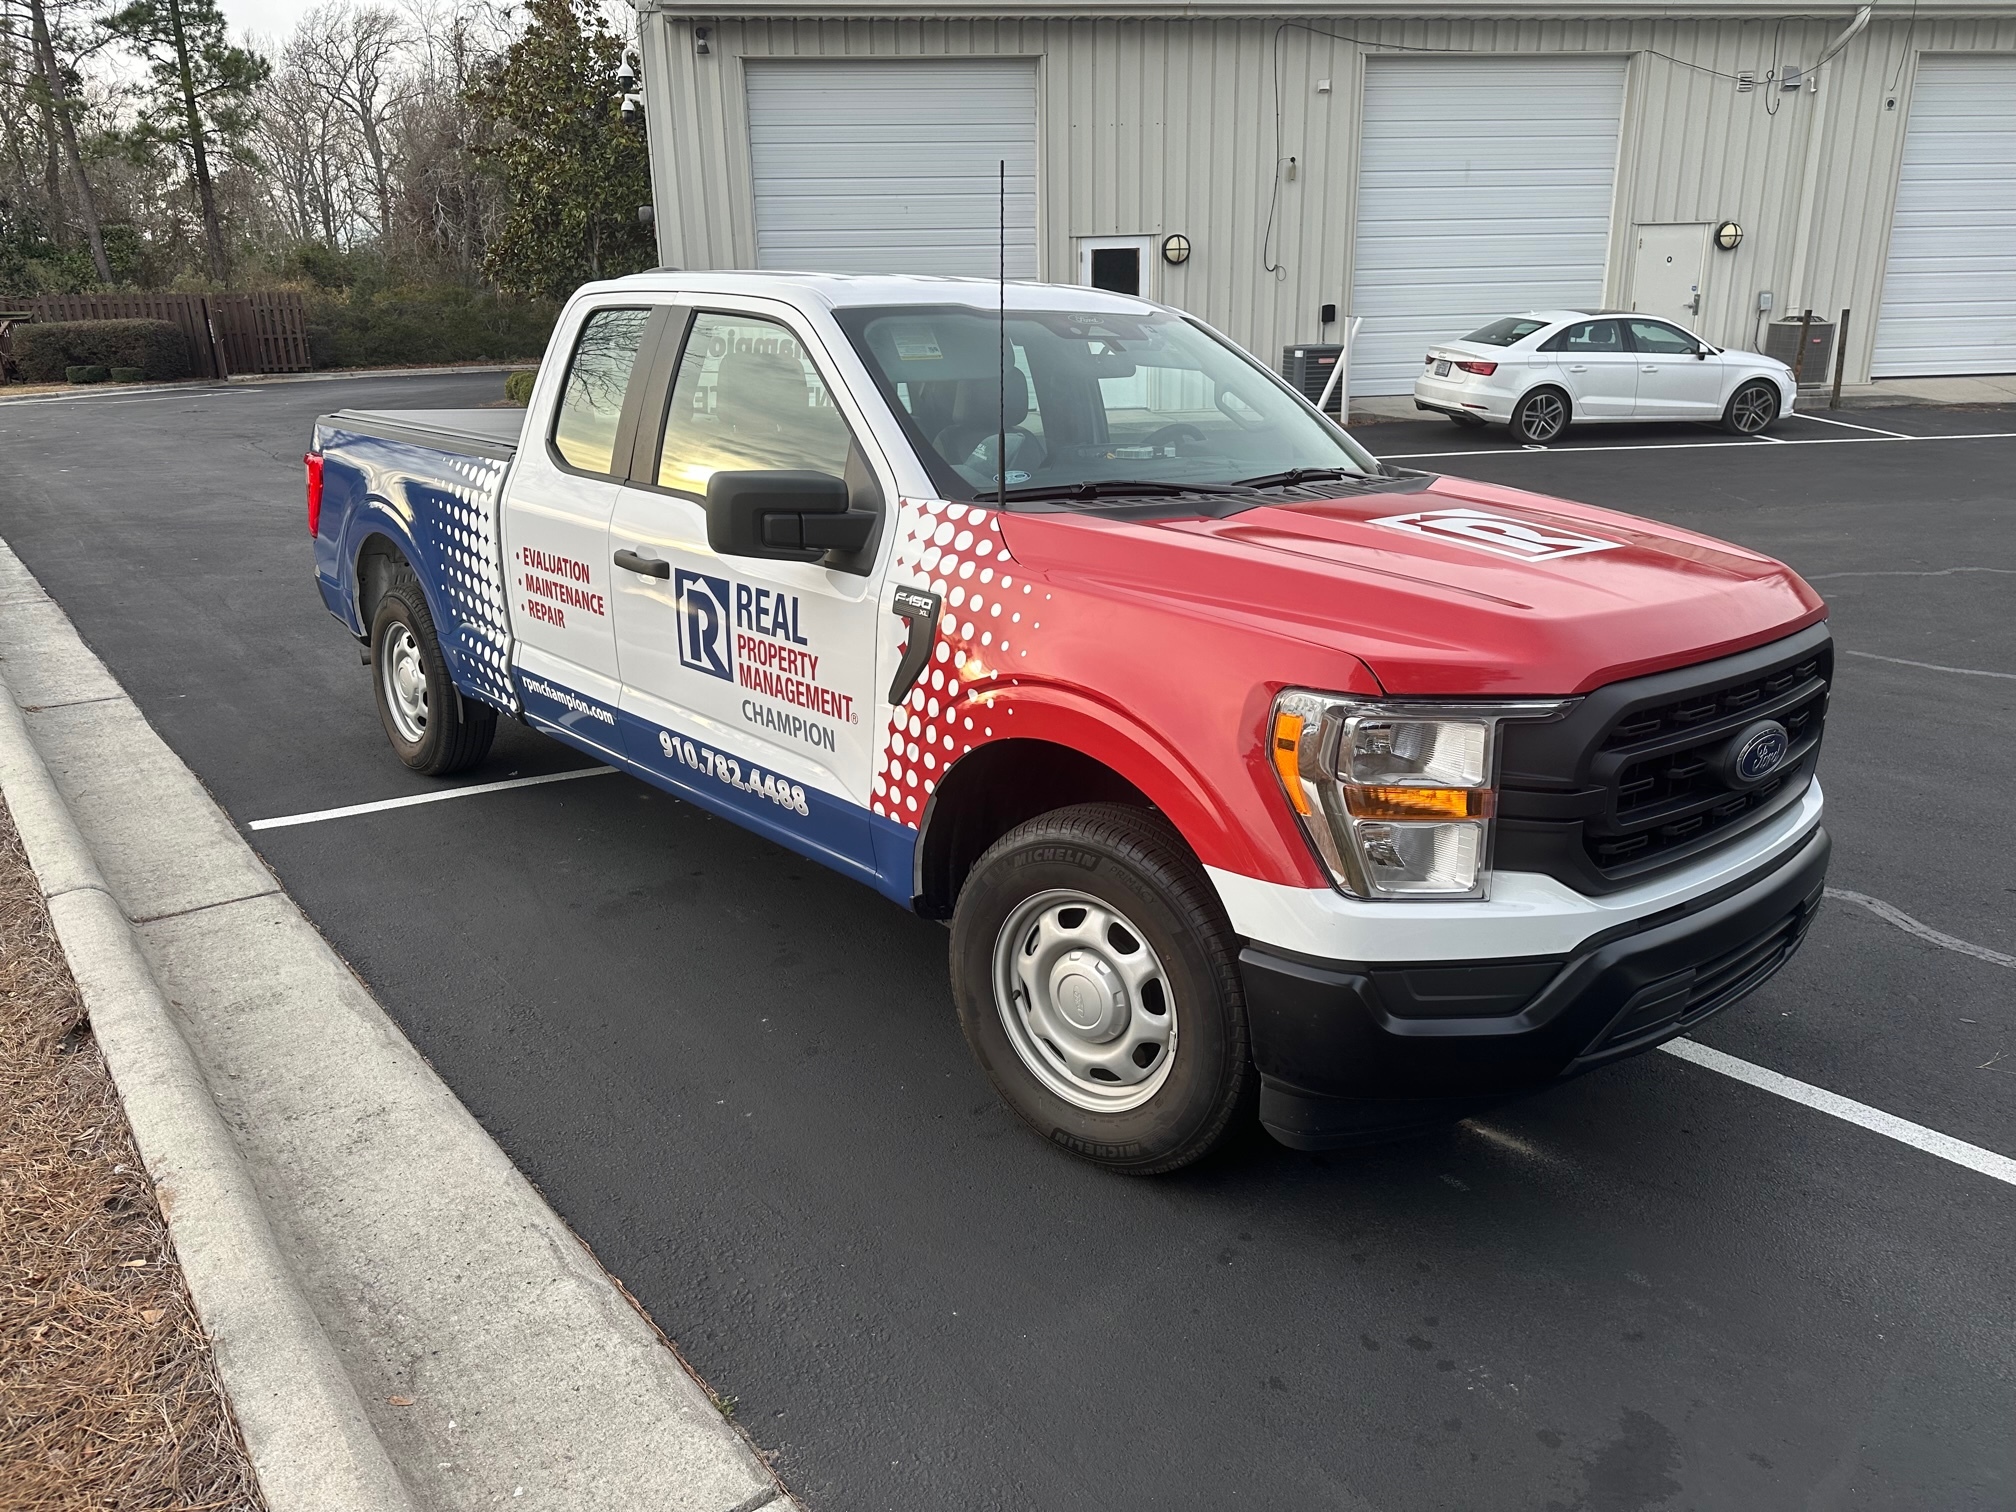 Vinyl wrapping on vehicle for adverting